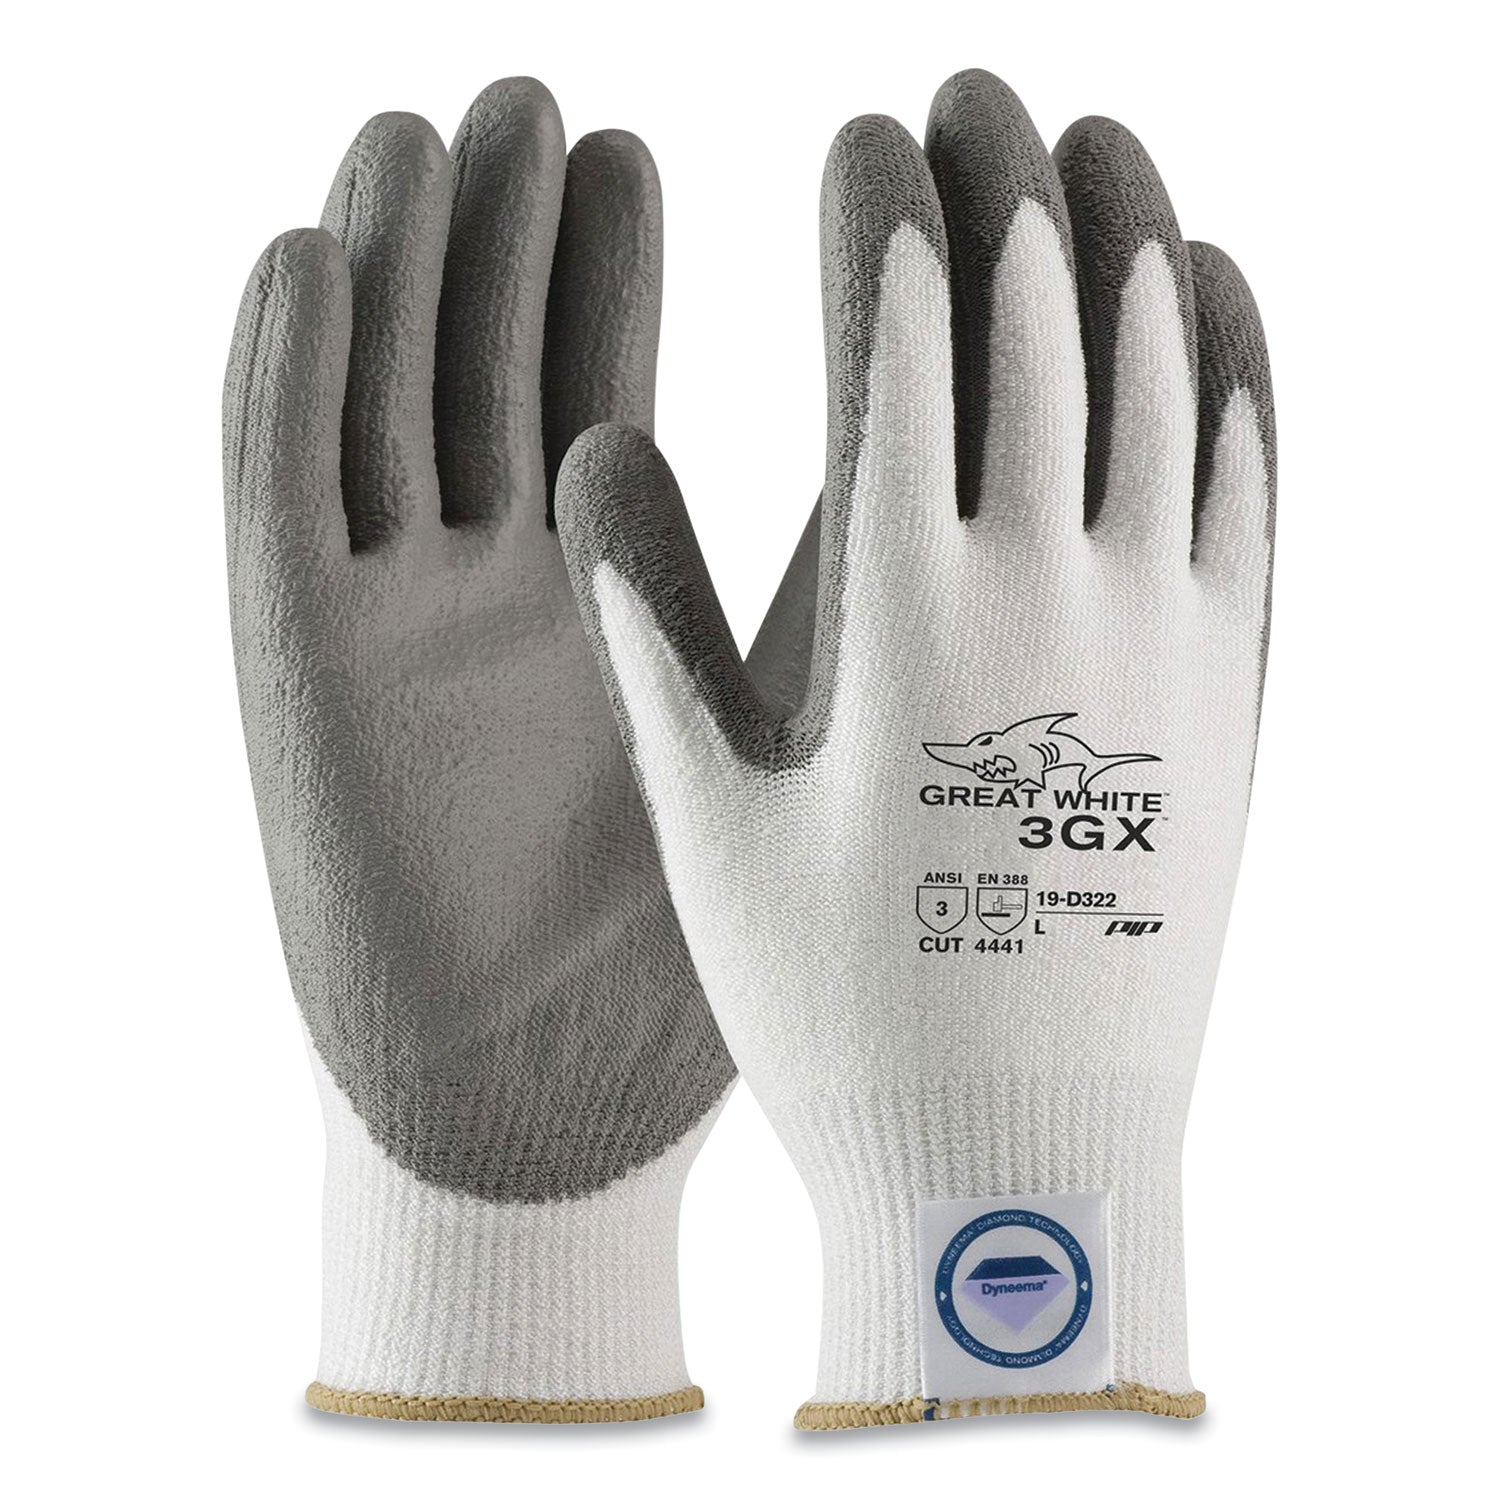 great-white-3gx-seamless-knit-dyneema-diamond-blended-gloves-large-white-gray_pid19d322l - 2